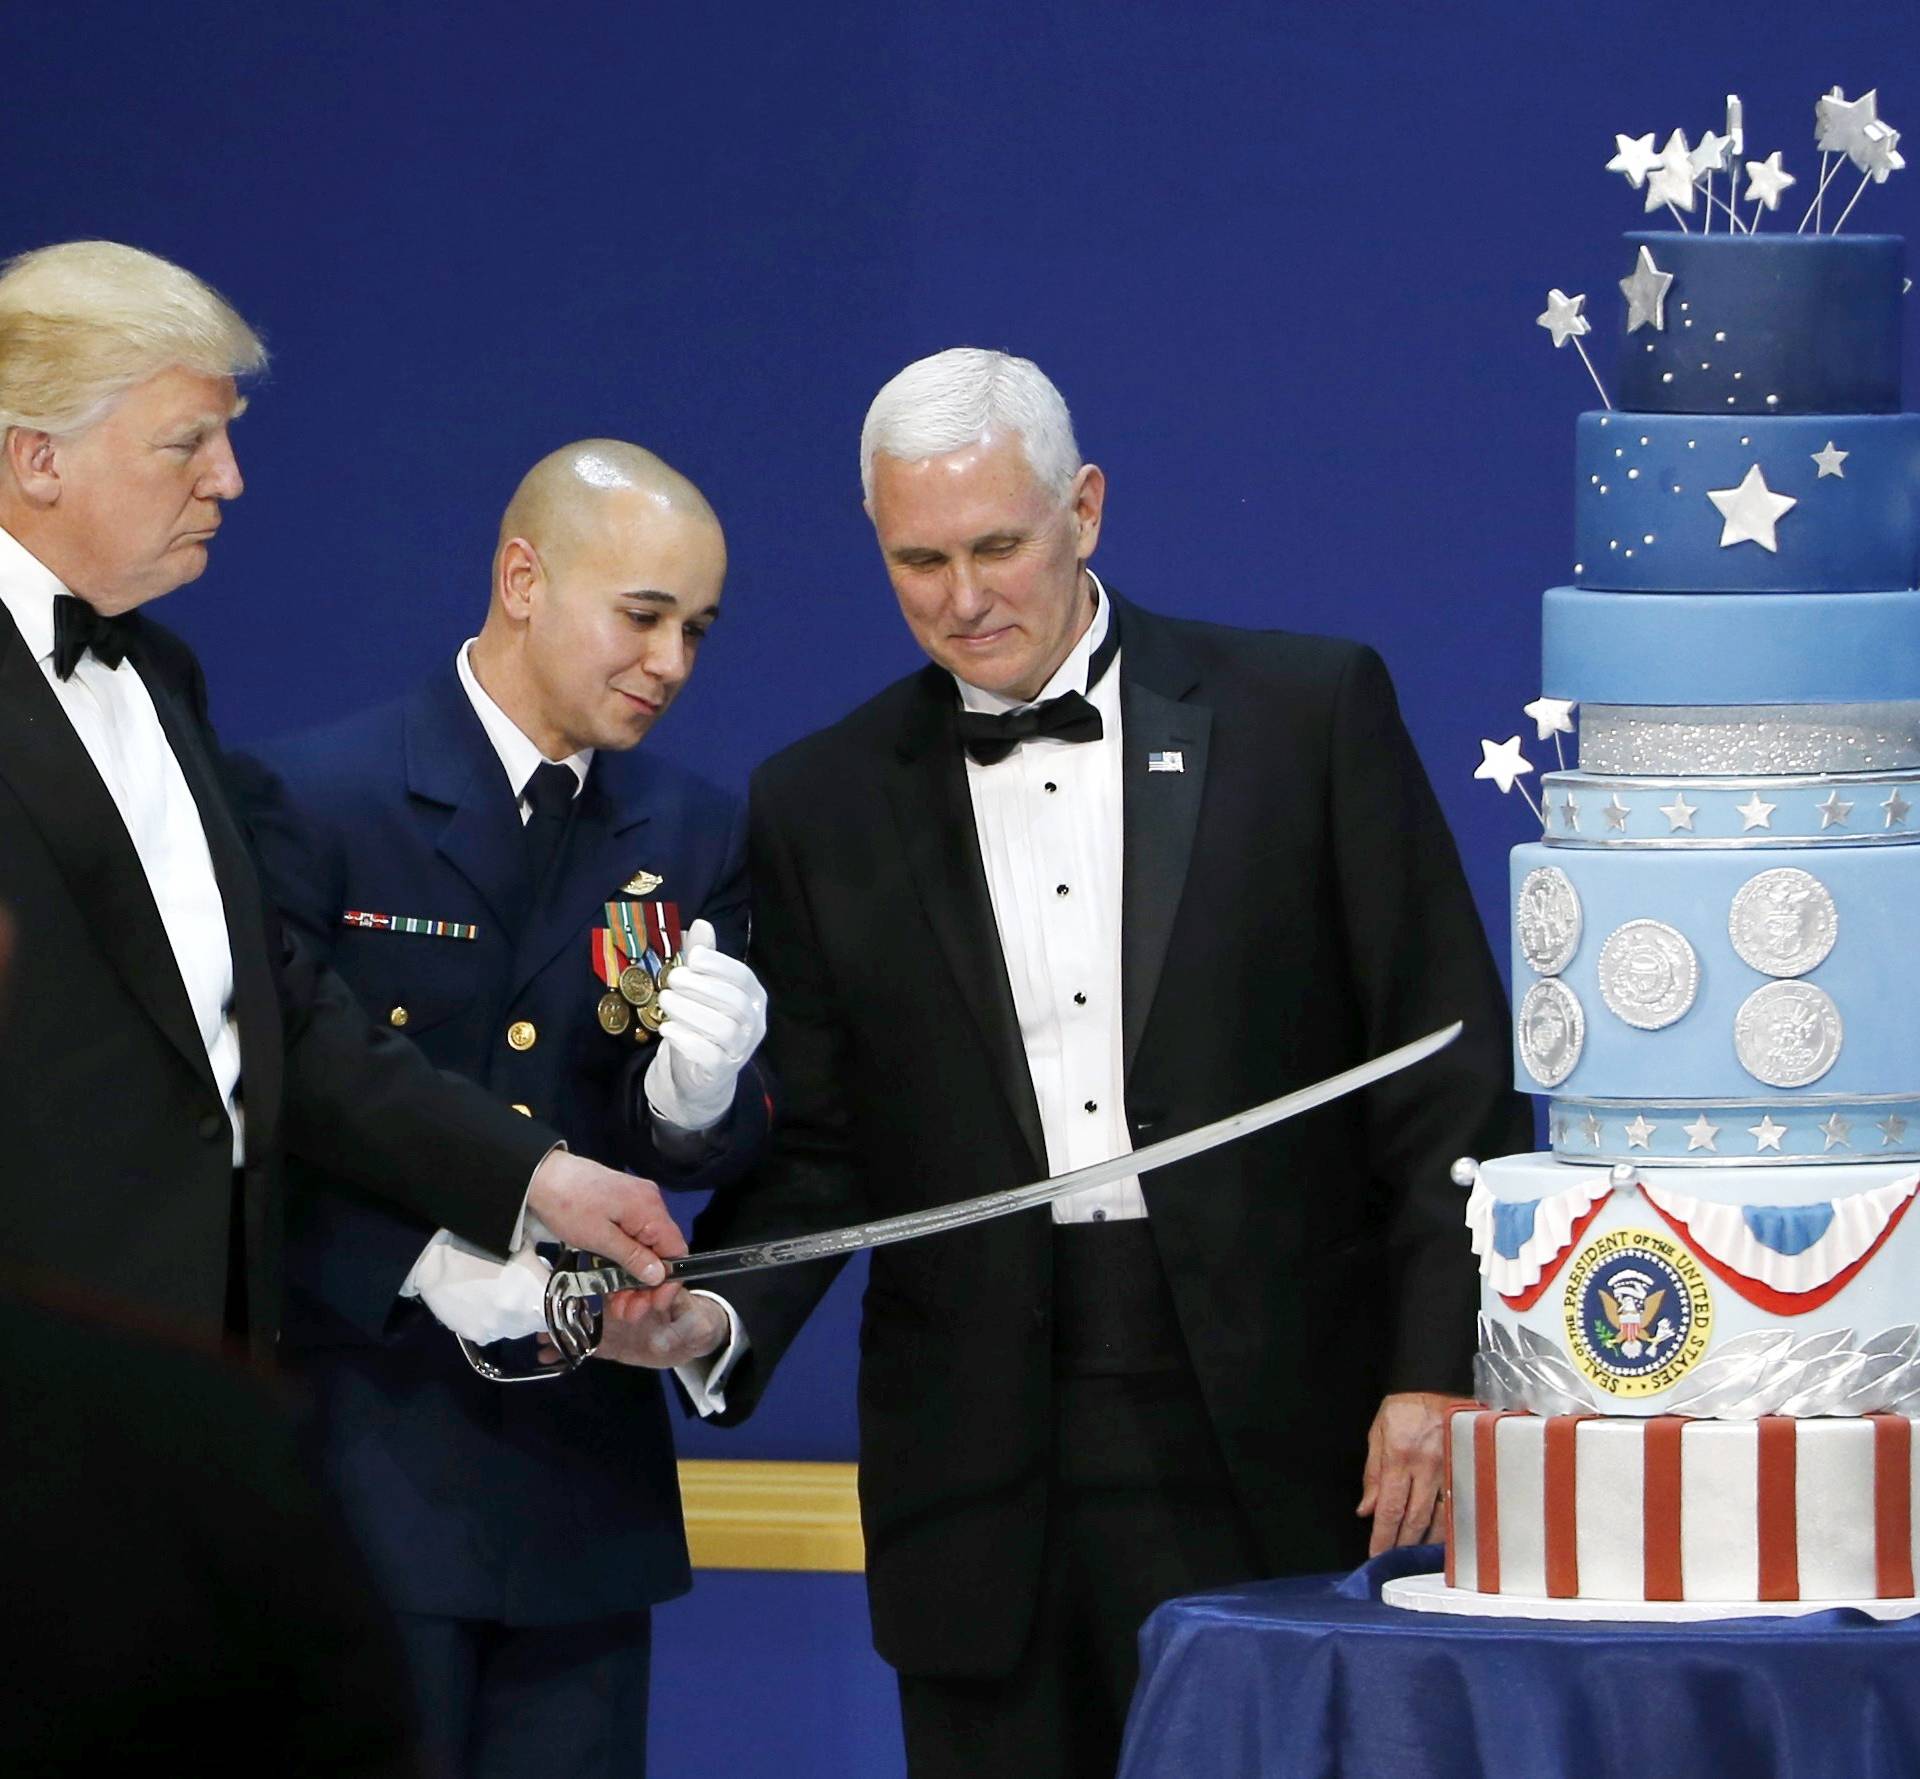 U.S. President Donald Trump and Vice President Mike Pence prepare to cut a cake with a sword at the "Salute to Our Armed Forces" inaugural ball during inauguration festivites in Washington